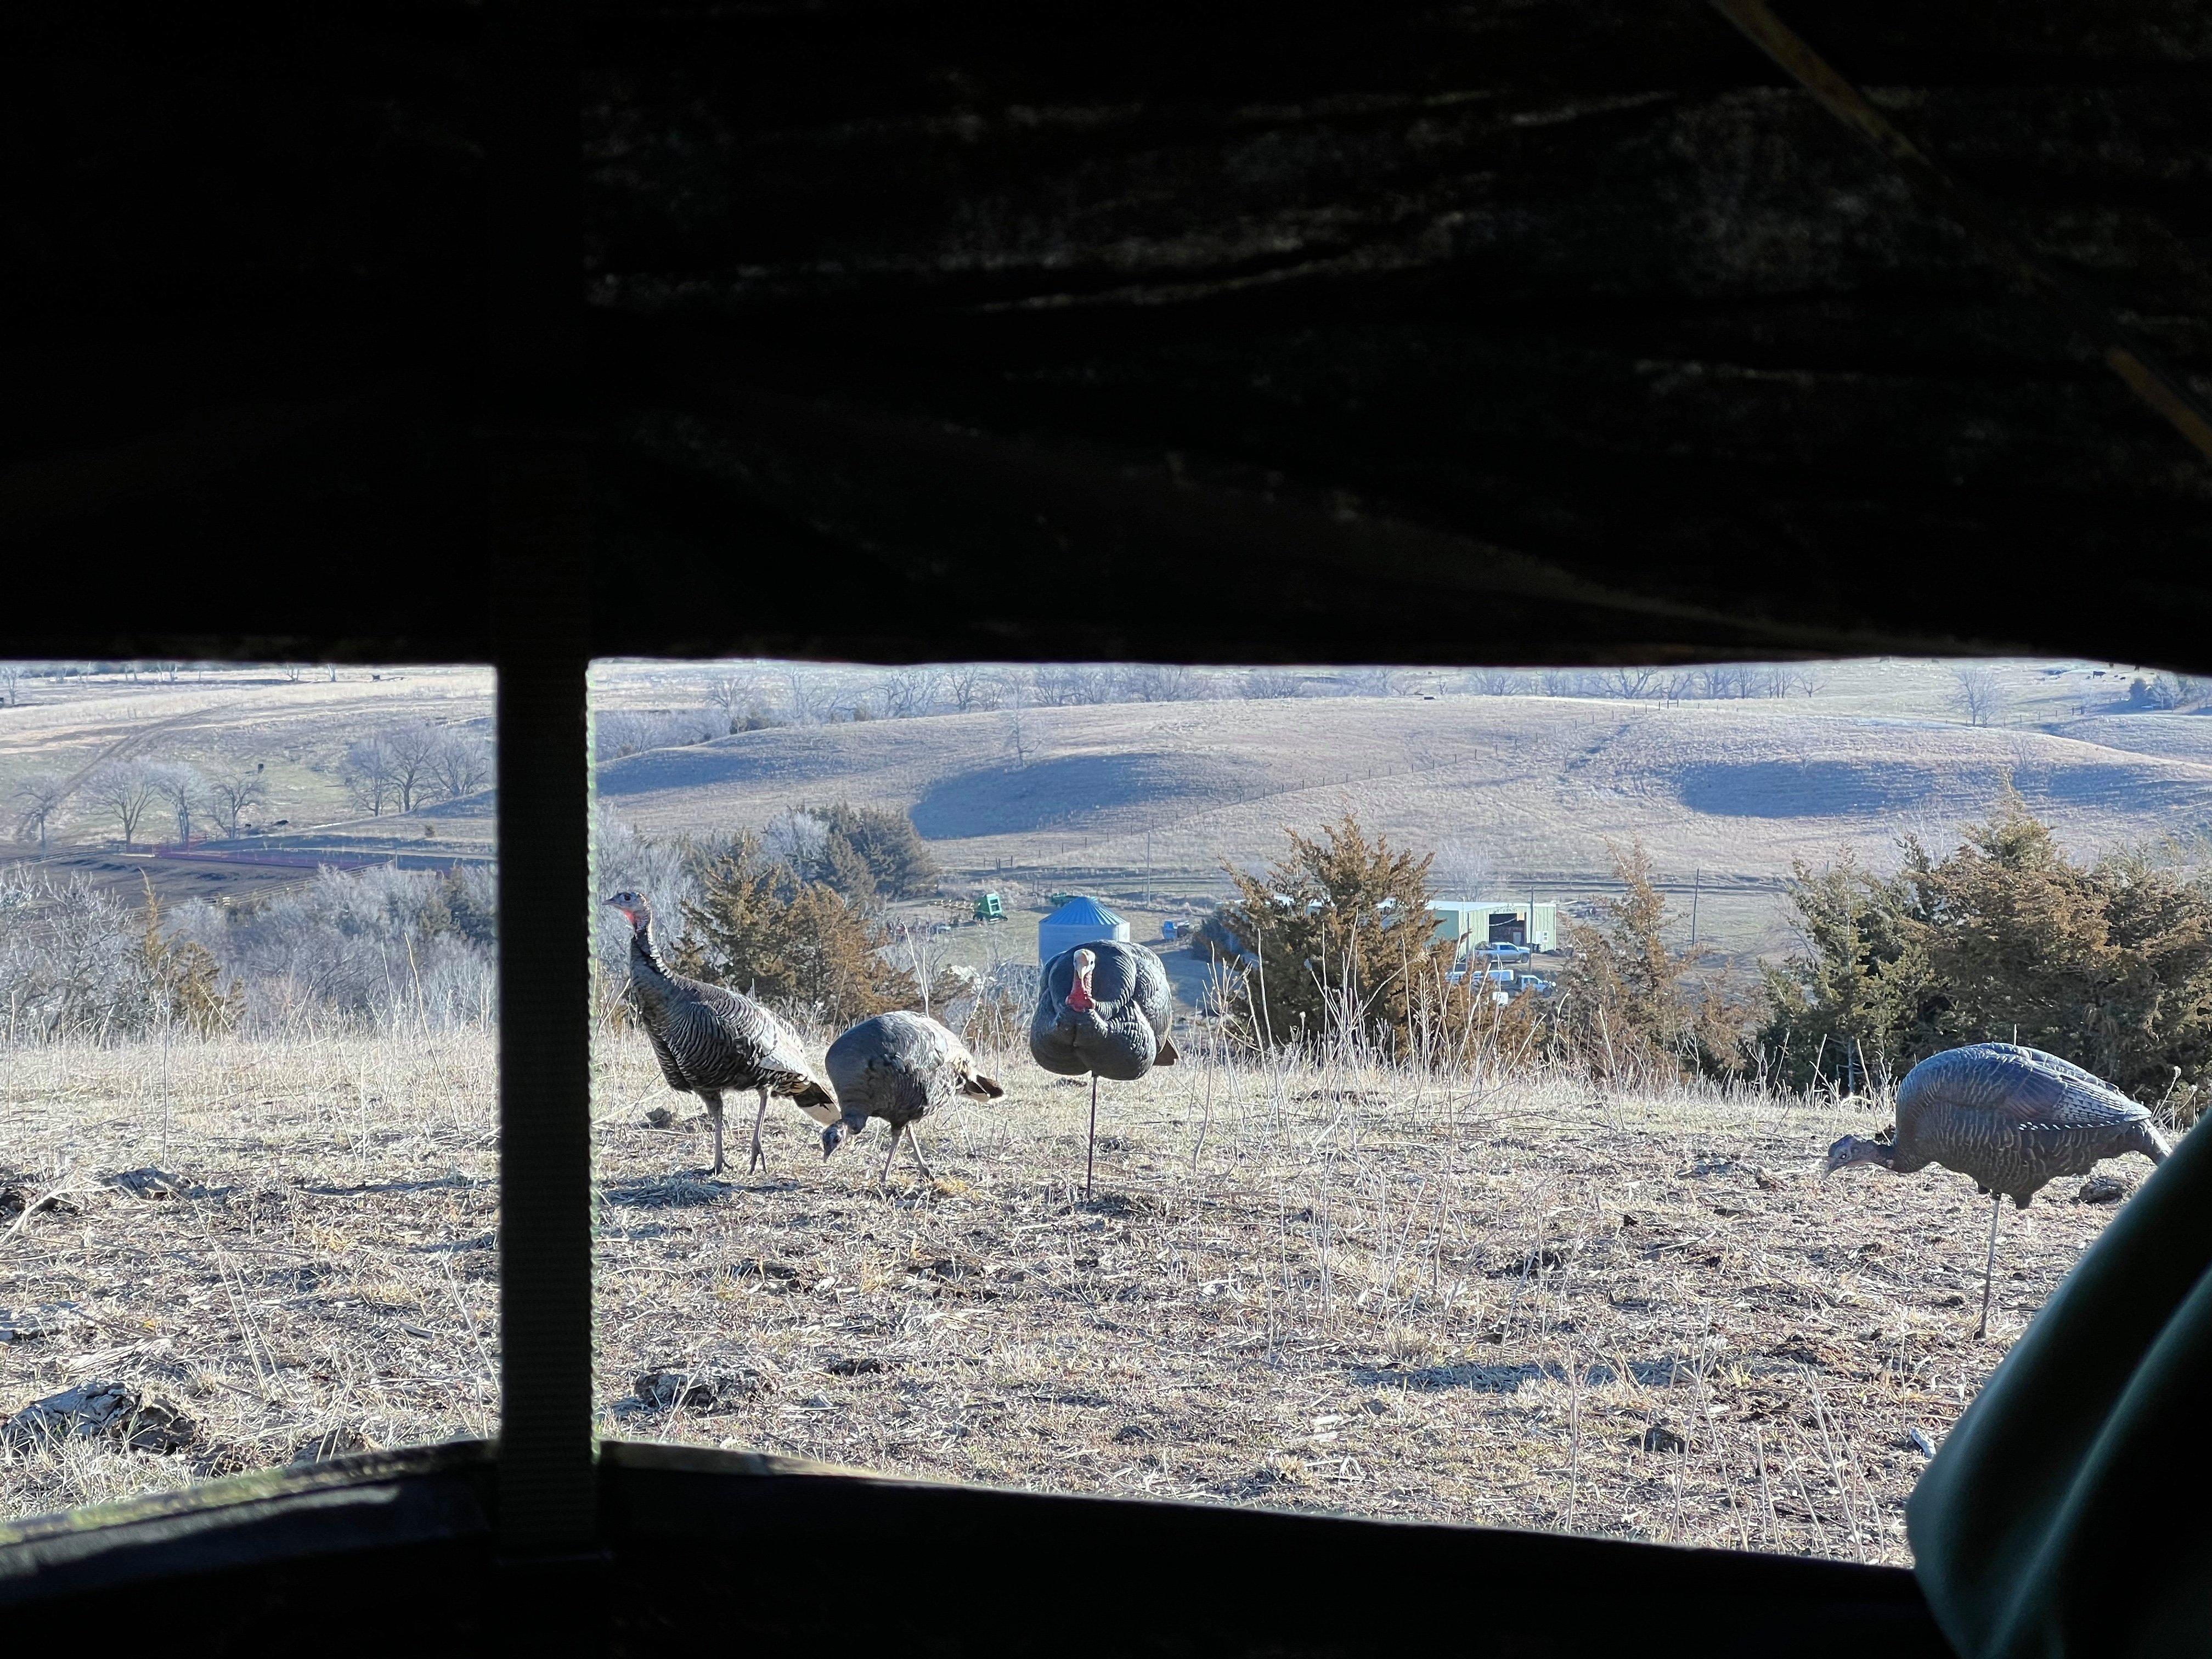  These hens were responsive to the author's calls and decoys in Nebraska, but unfortunately they weren't joined by any toms. Photo by Darron McDougal